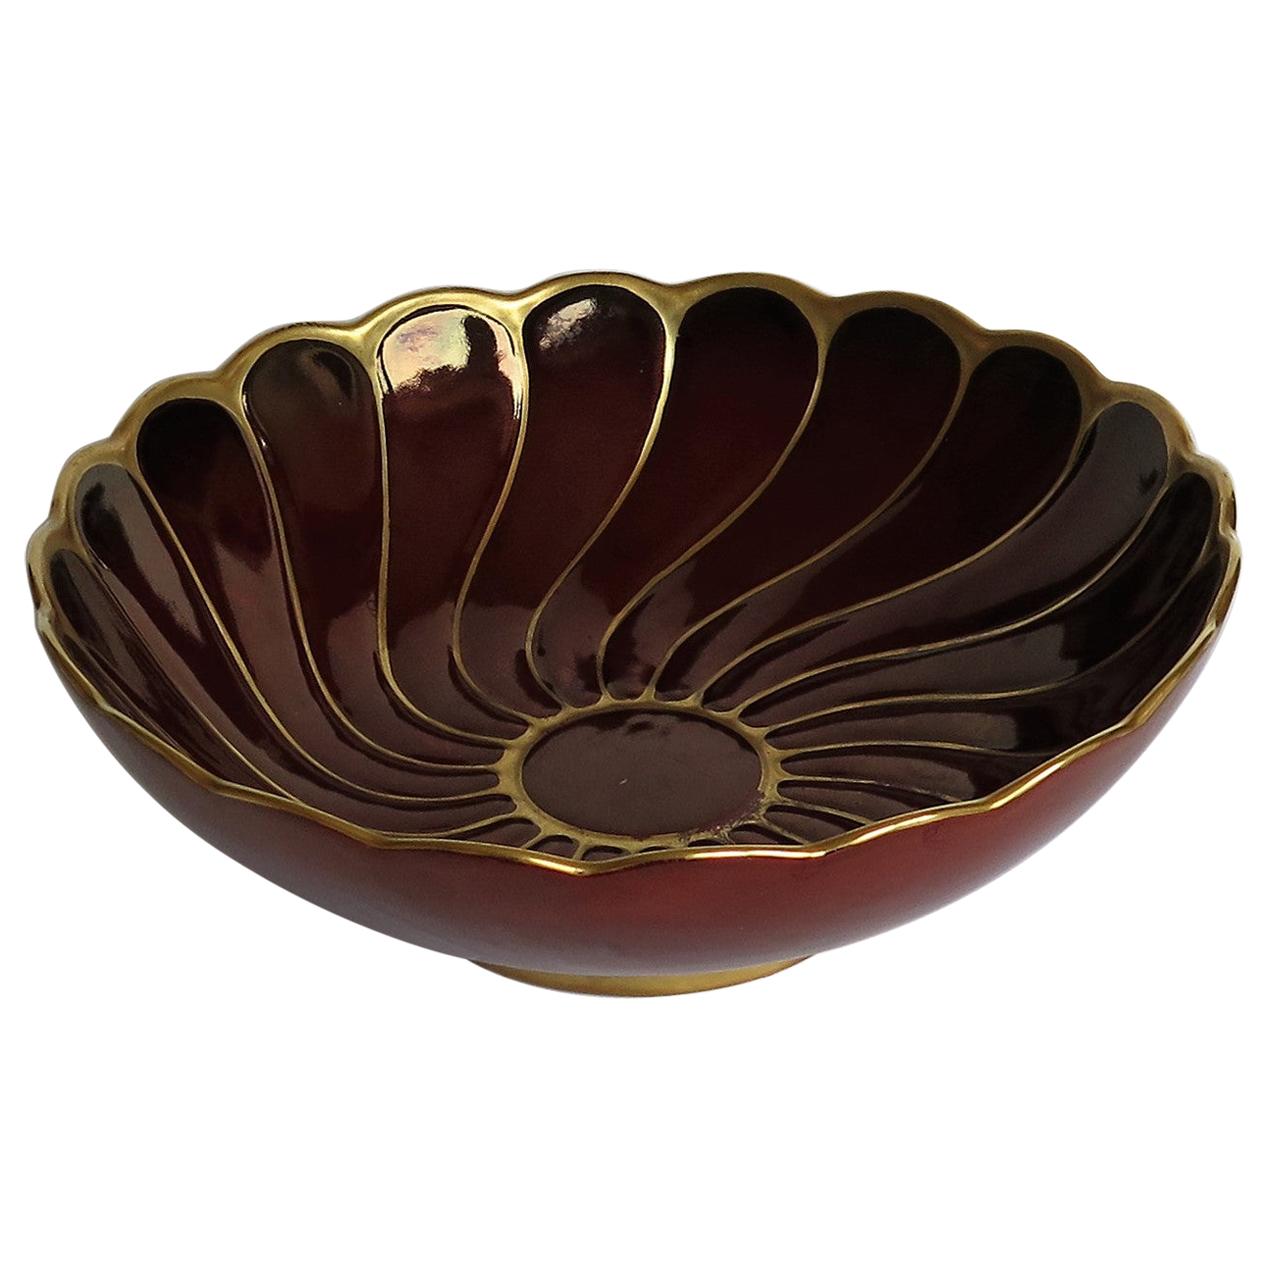 Carlton Ware Bowl Hand Painted in Flambe Lustre Rouge Royale Pattern, circa 1950